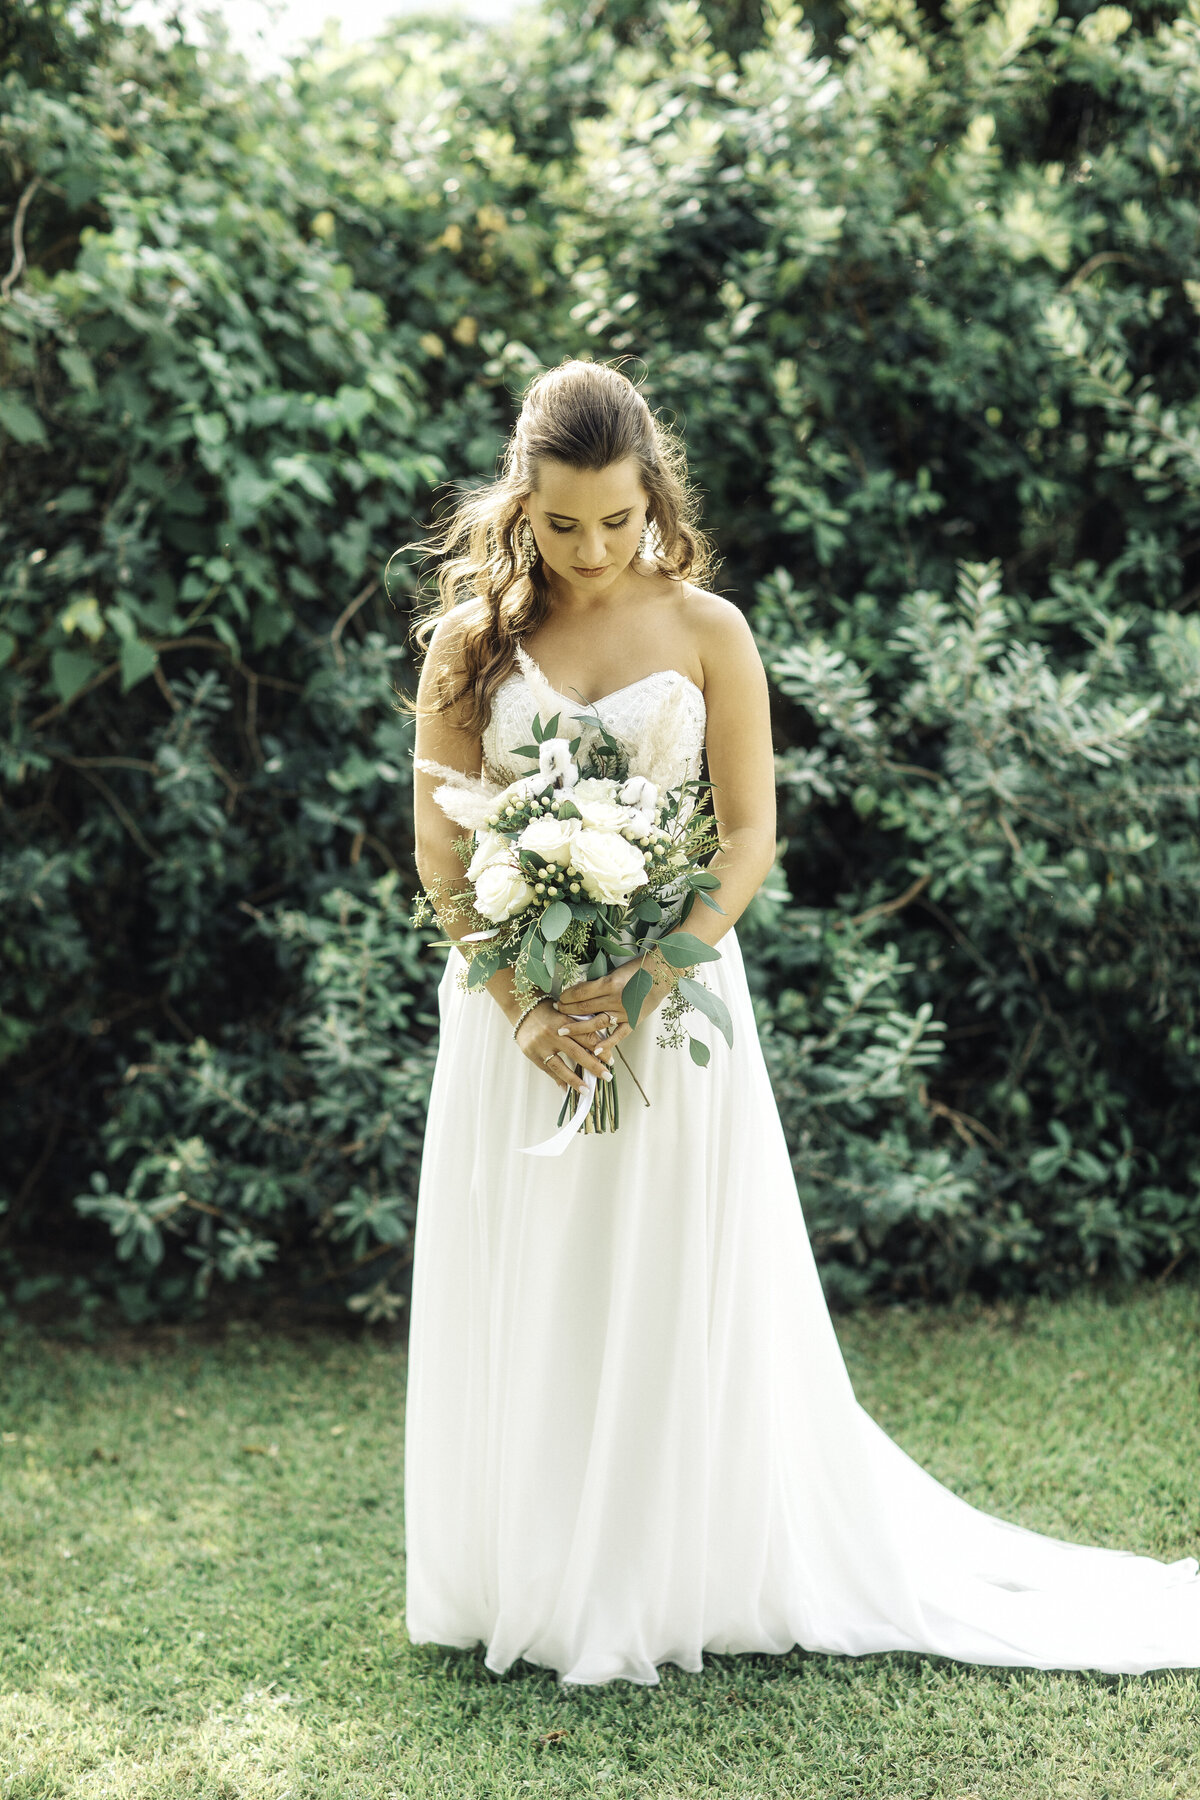 Wedding Photograph Of Bride Standing in Her White Dress Holding a Bouquet Of Flowers  Los Angeles